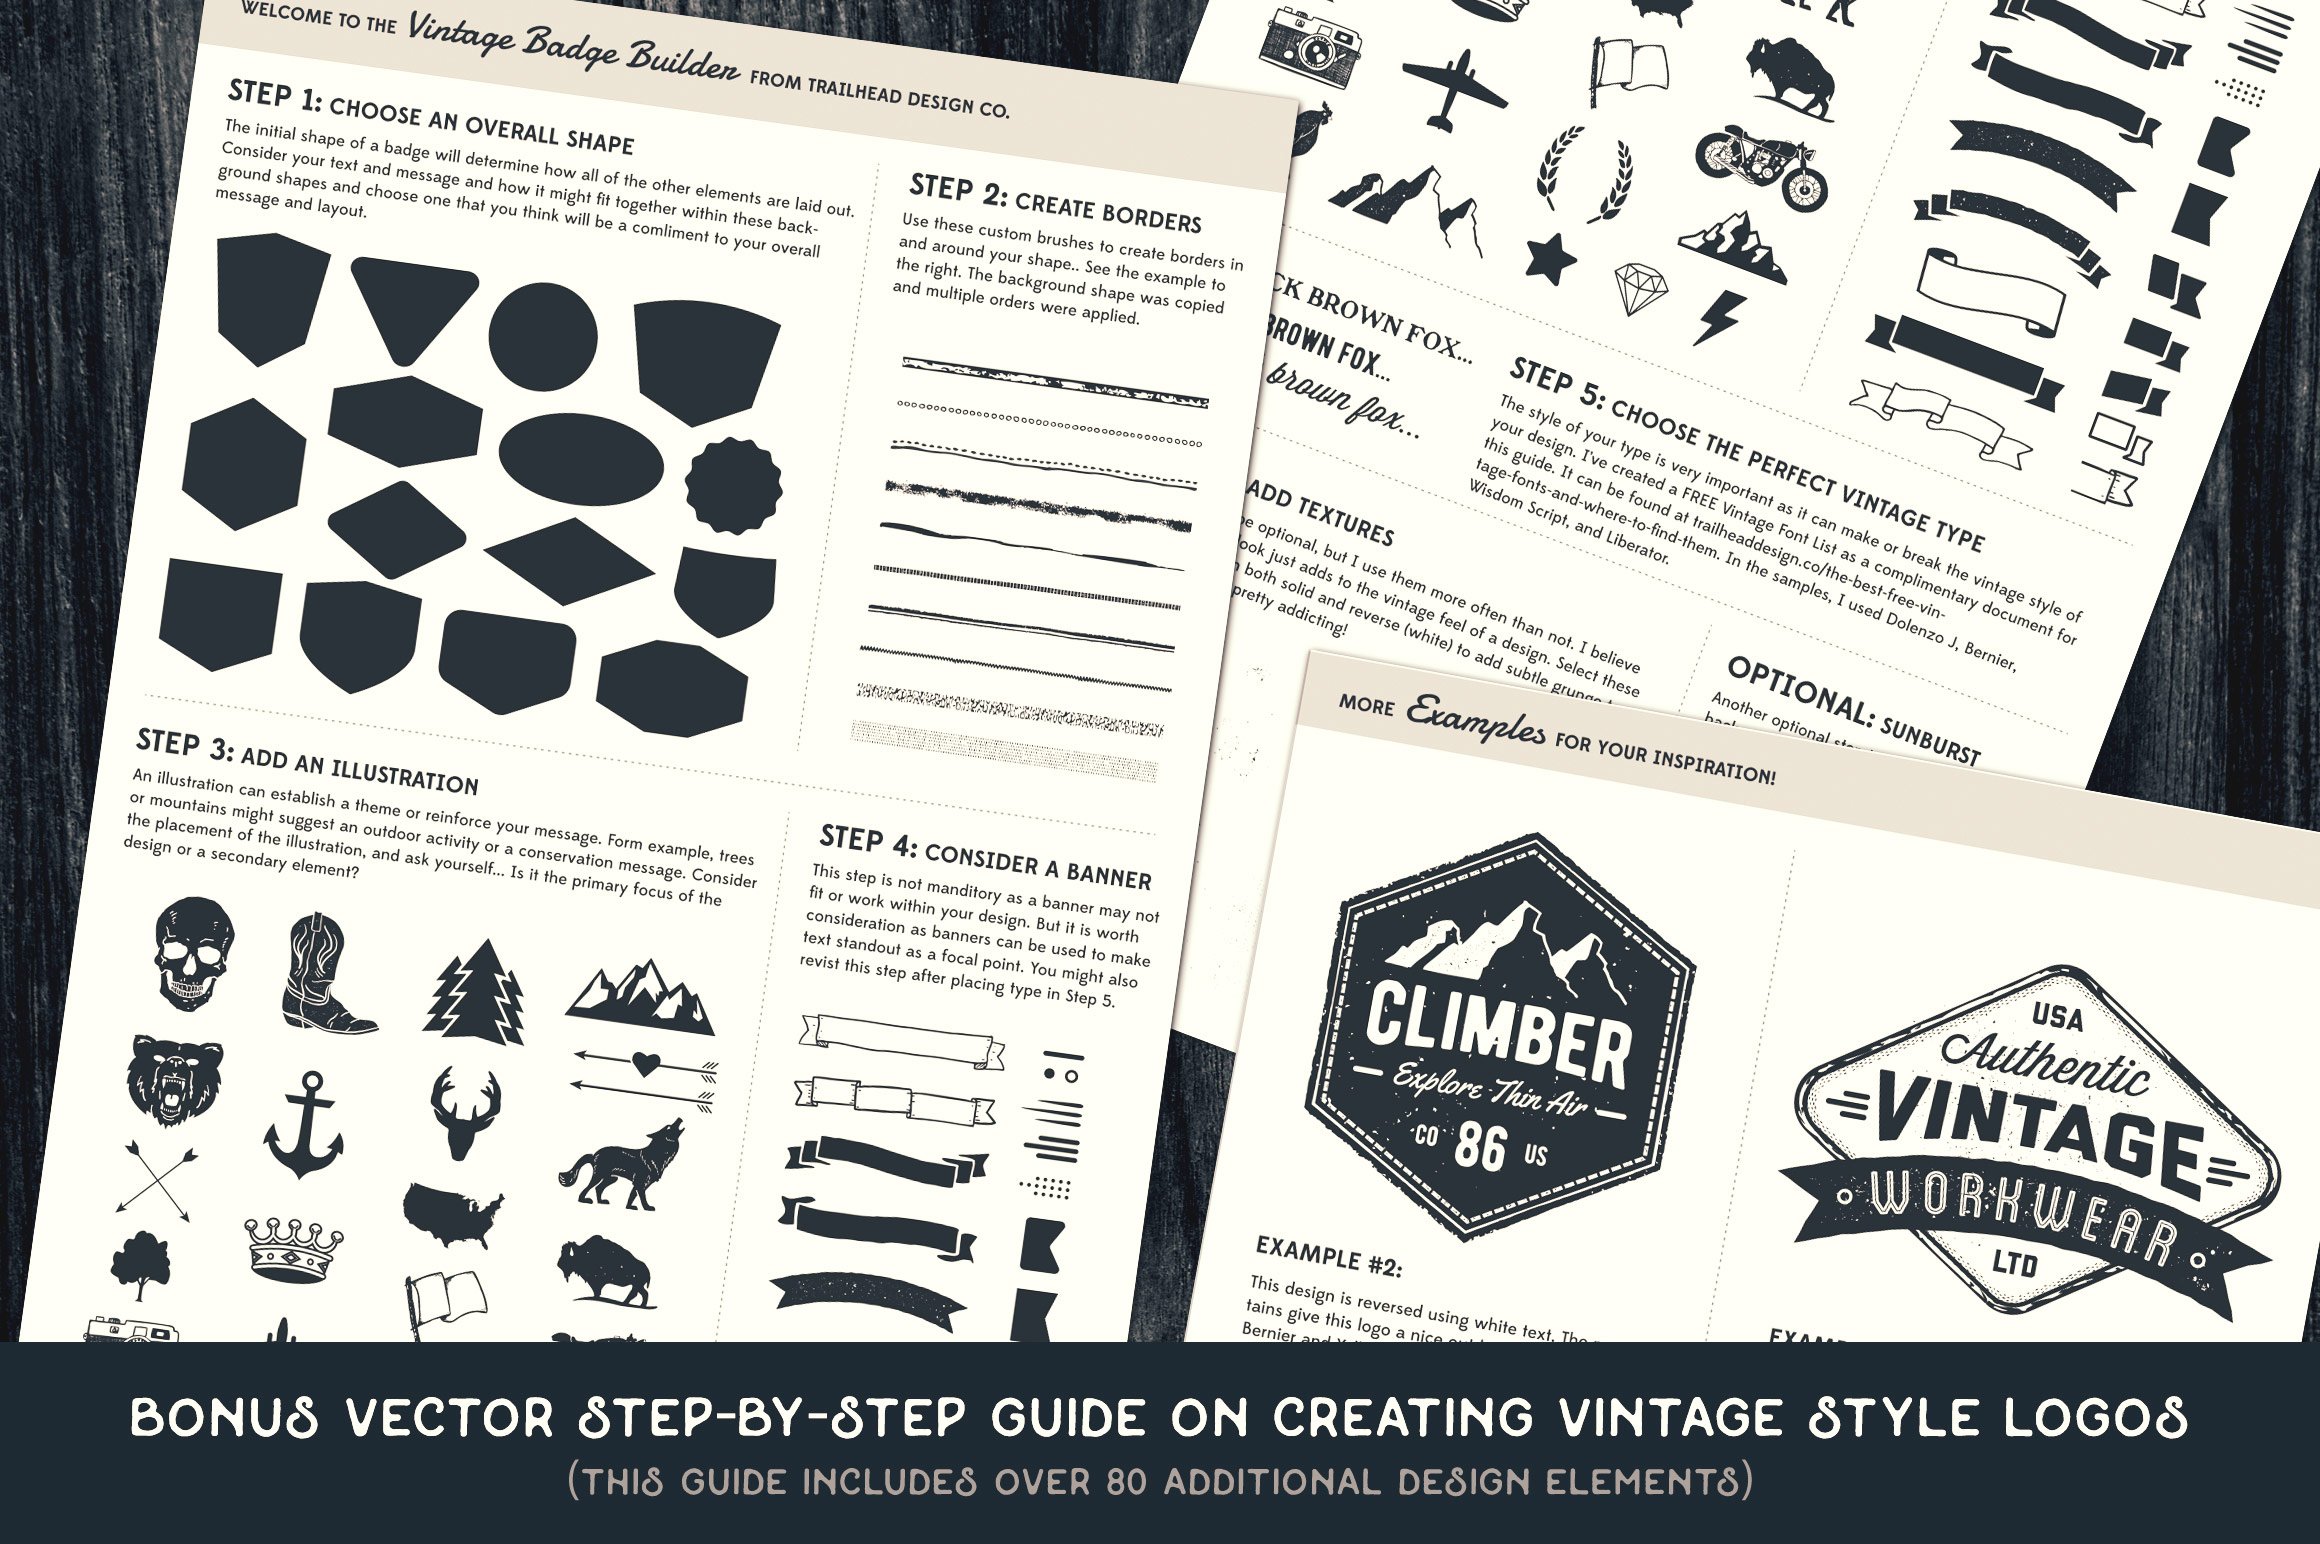 This guide includes over 80 additional design elements.